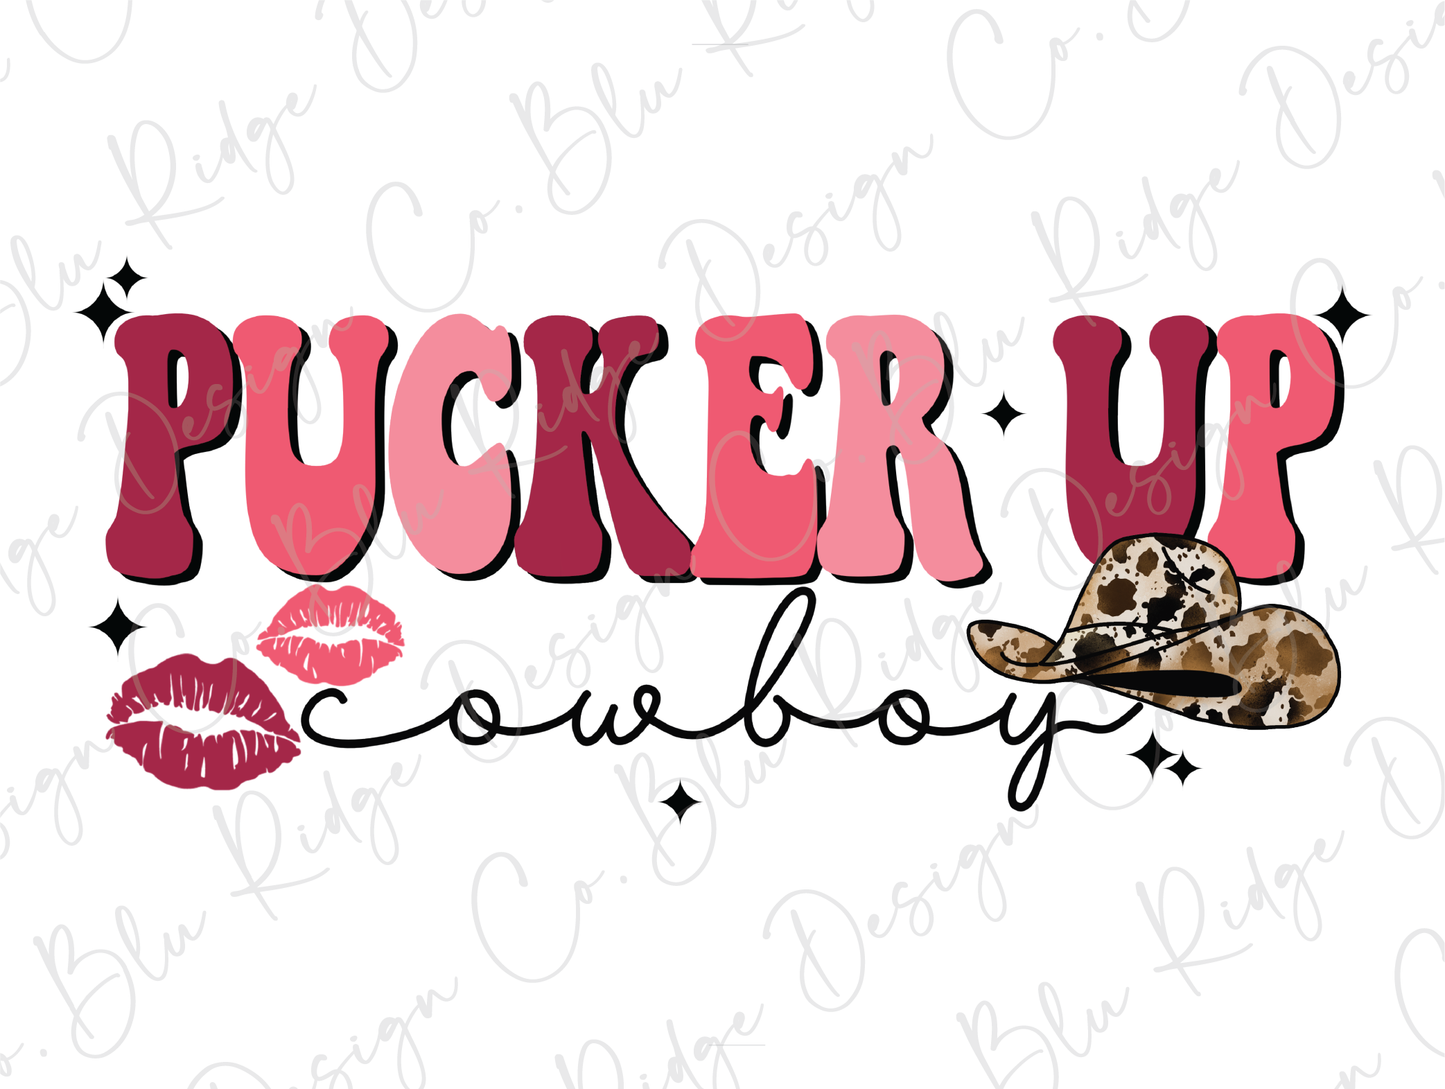 Pucker Up Cowboy Lips Valentines Day Cow Print Hat Direct To Film (DTF) Transfer